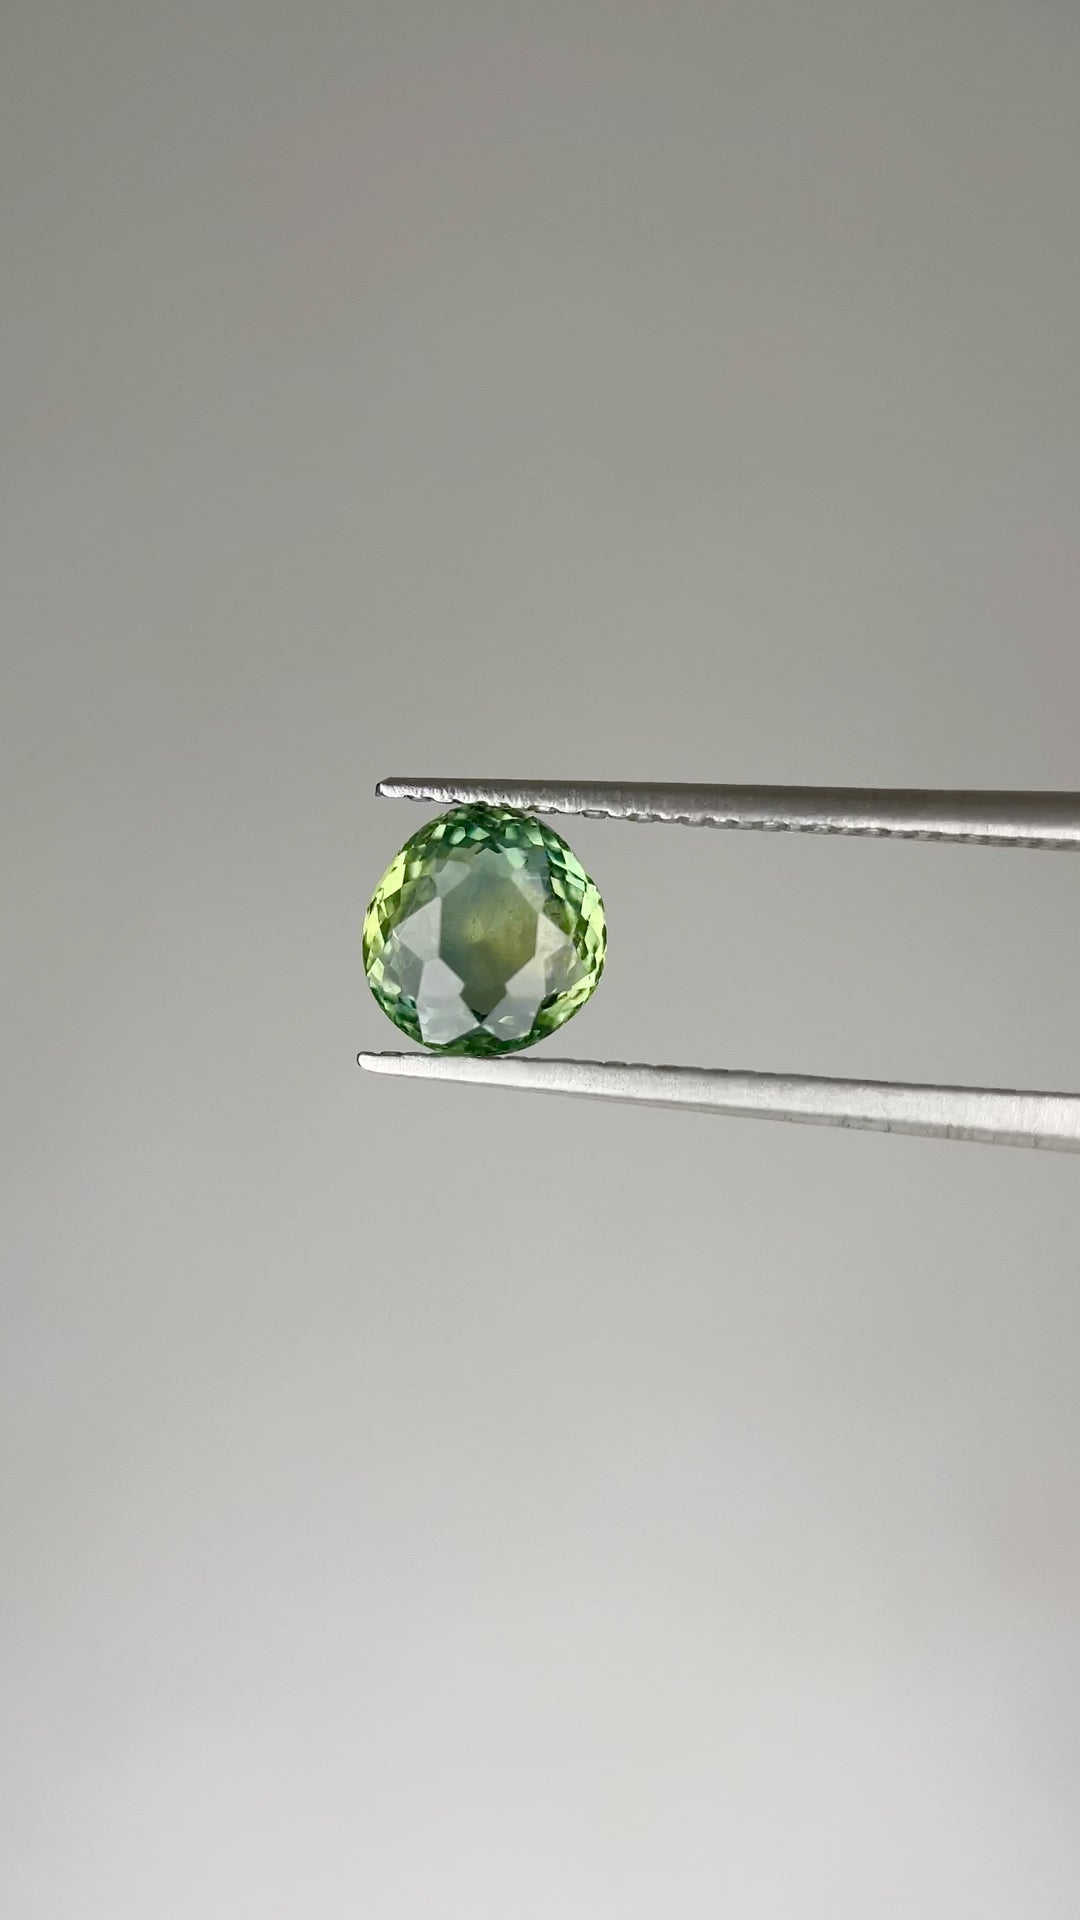 New Forrest Green - 1.43ct